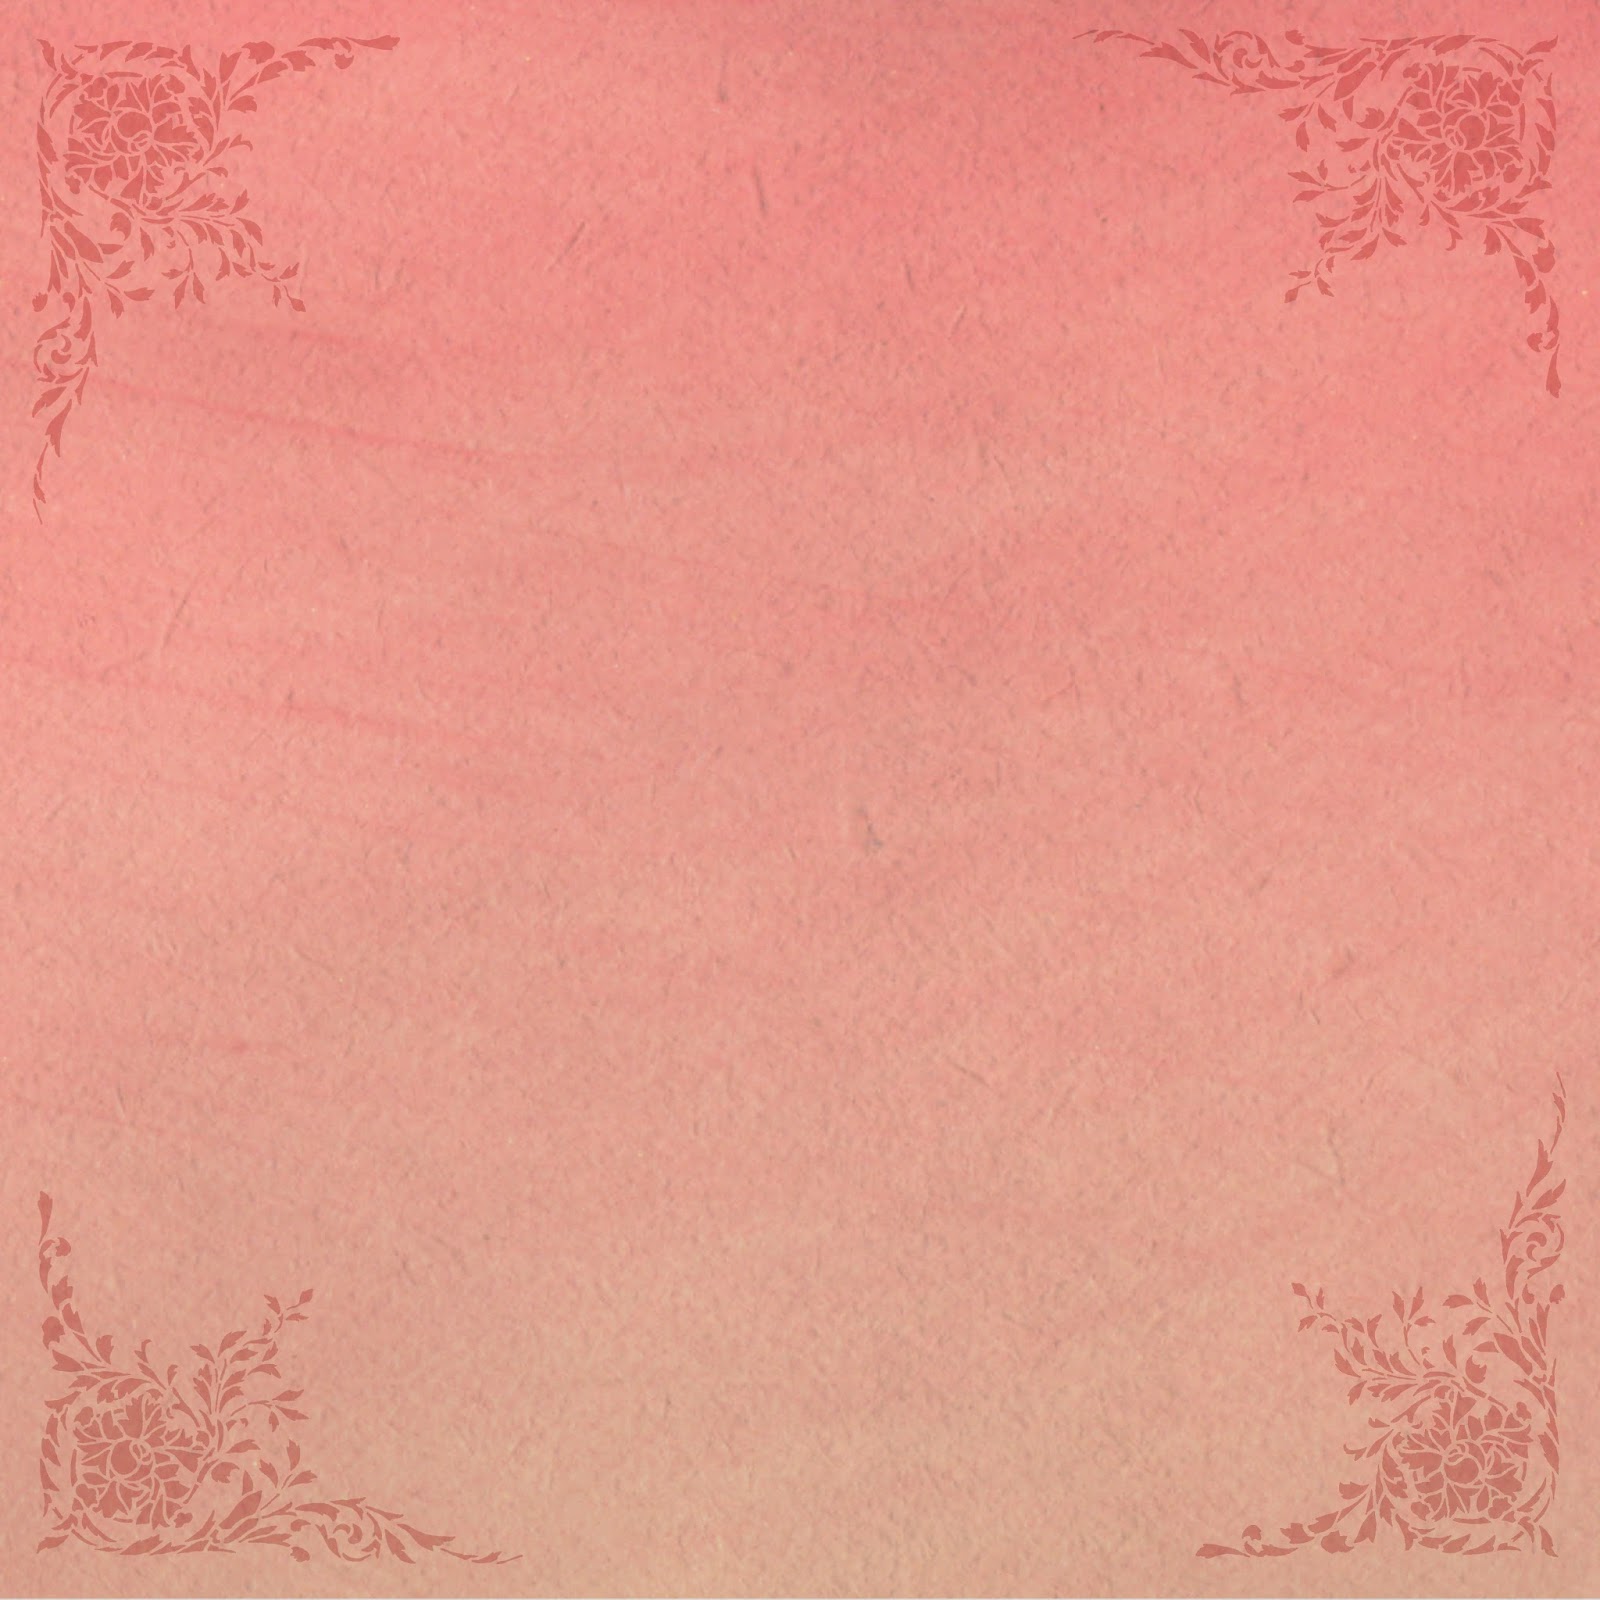 antique-images-printable-scrapbooking-paper-12x12-pink-backgrounds